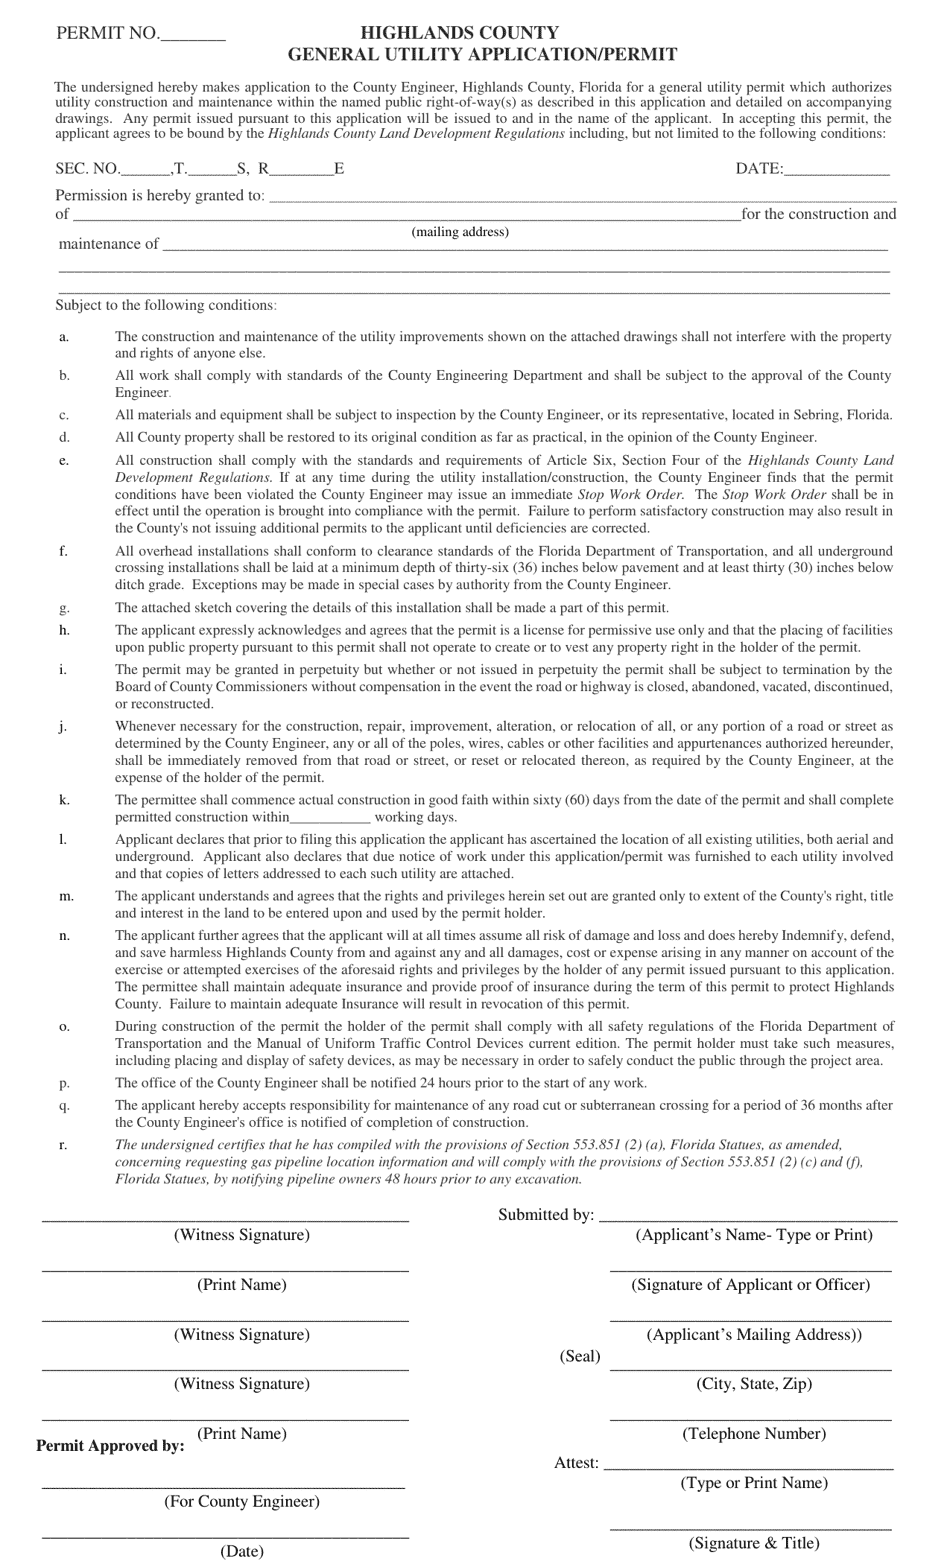 General Utility Application / Permit - Highlands County, Florida, Page 1